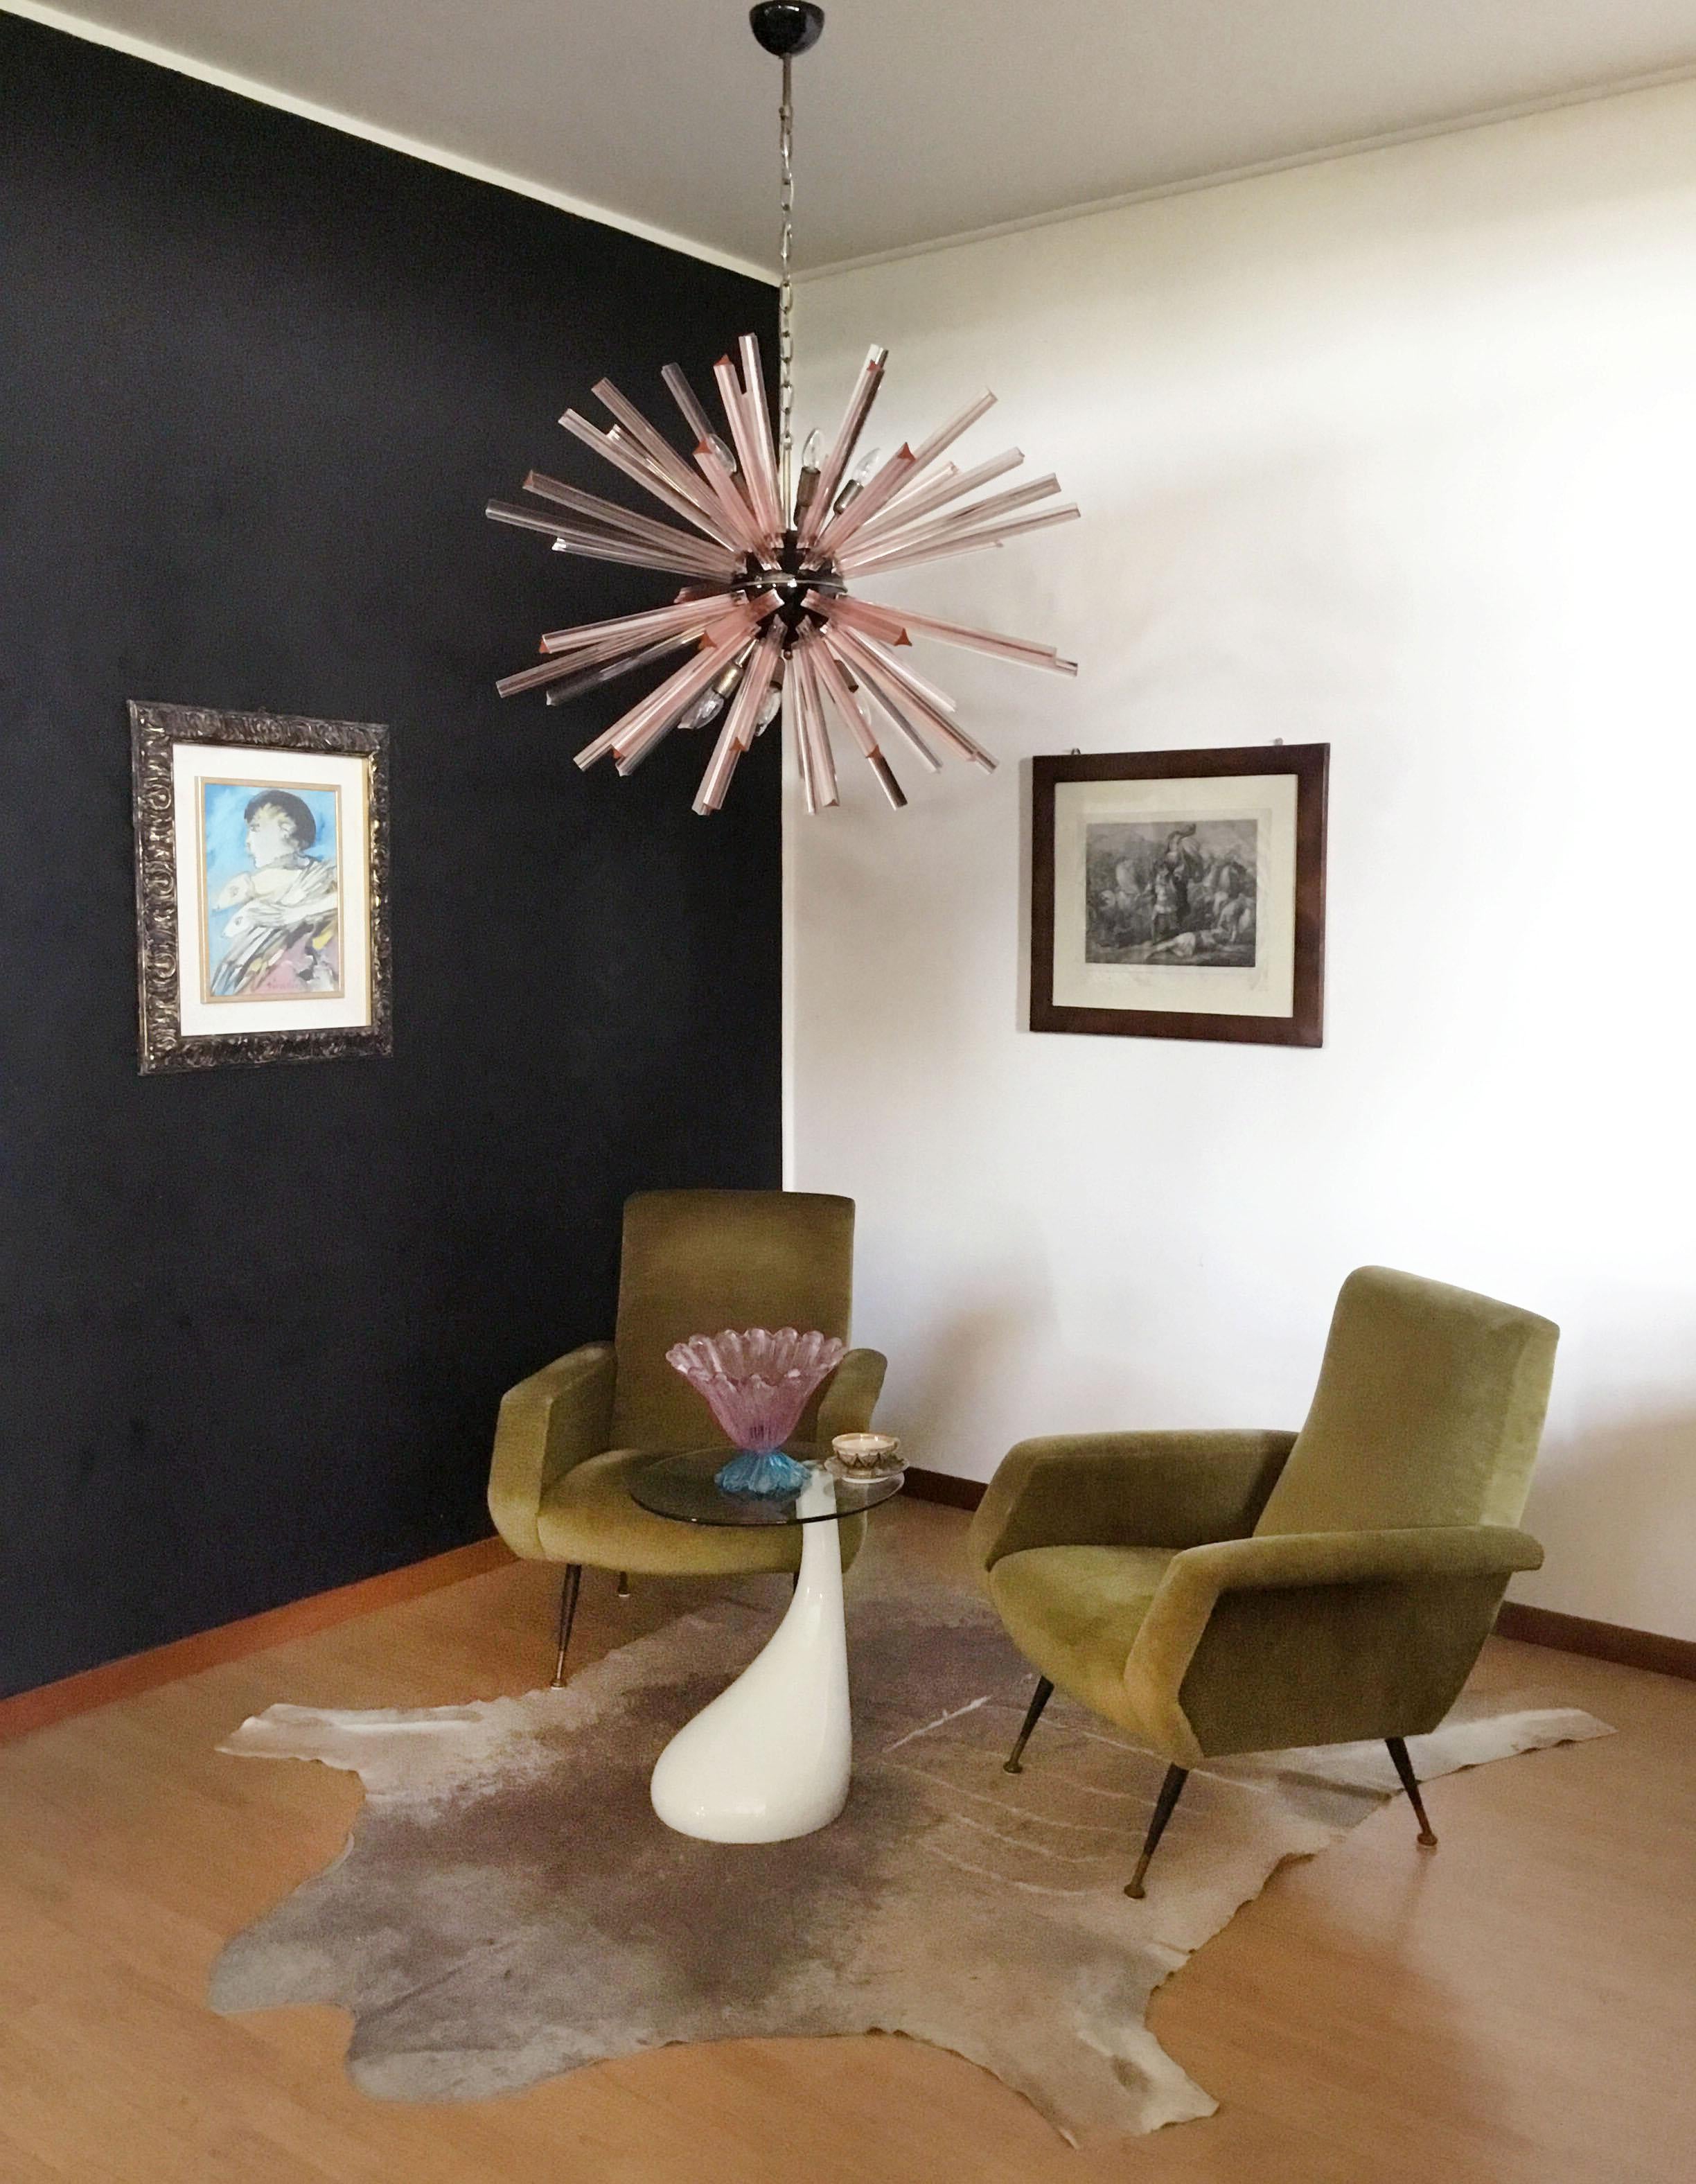 Sputnik chandelier surrounding 50 pink glass 'triedri' prisms radiating from a center black metal nucleus. Brass lamp holder.
Period: late xx century
Dimensions: 51,20 inches (130 cm) height with chain; 27,55 inches (70 cm) height without chain;